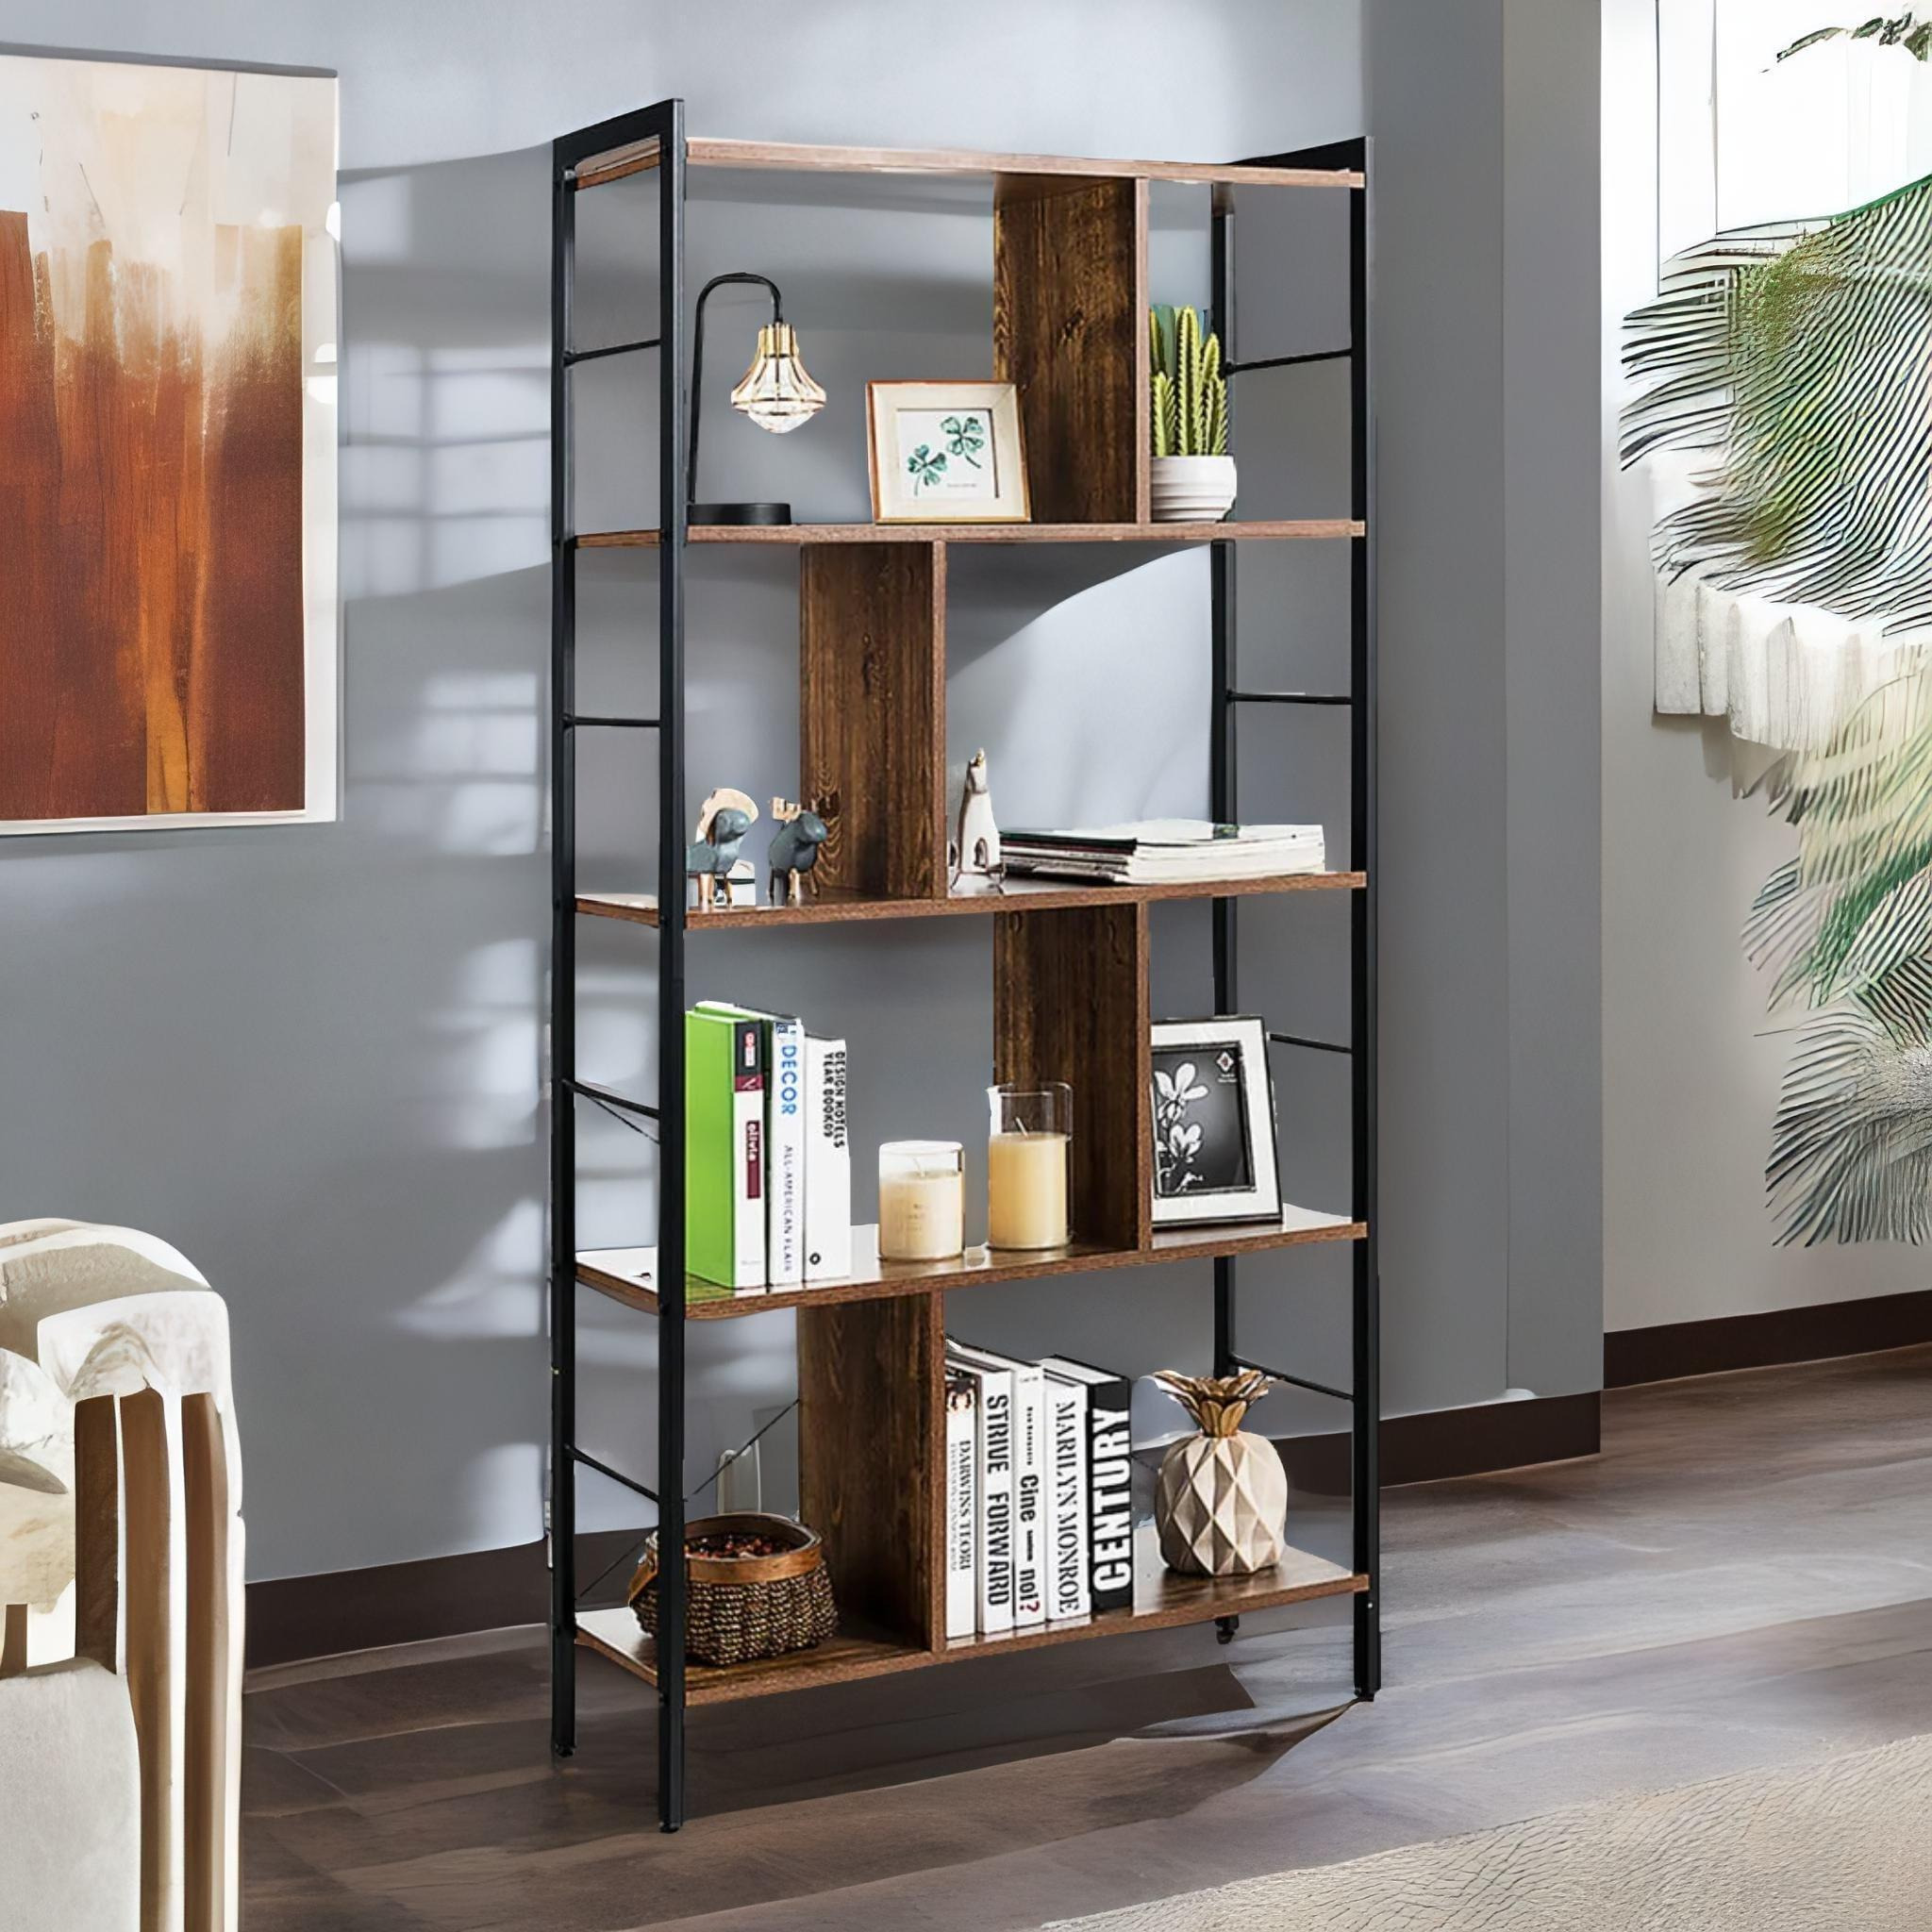 154CM Tall 5 Tier Bookcase With Metal Frame - image 1